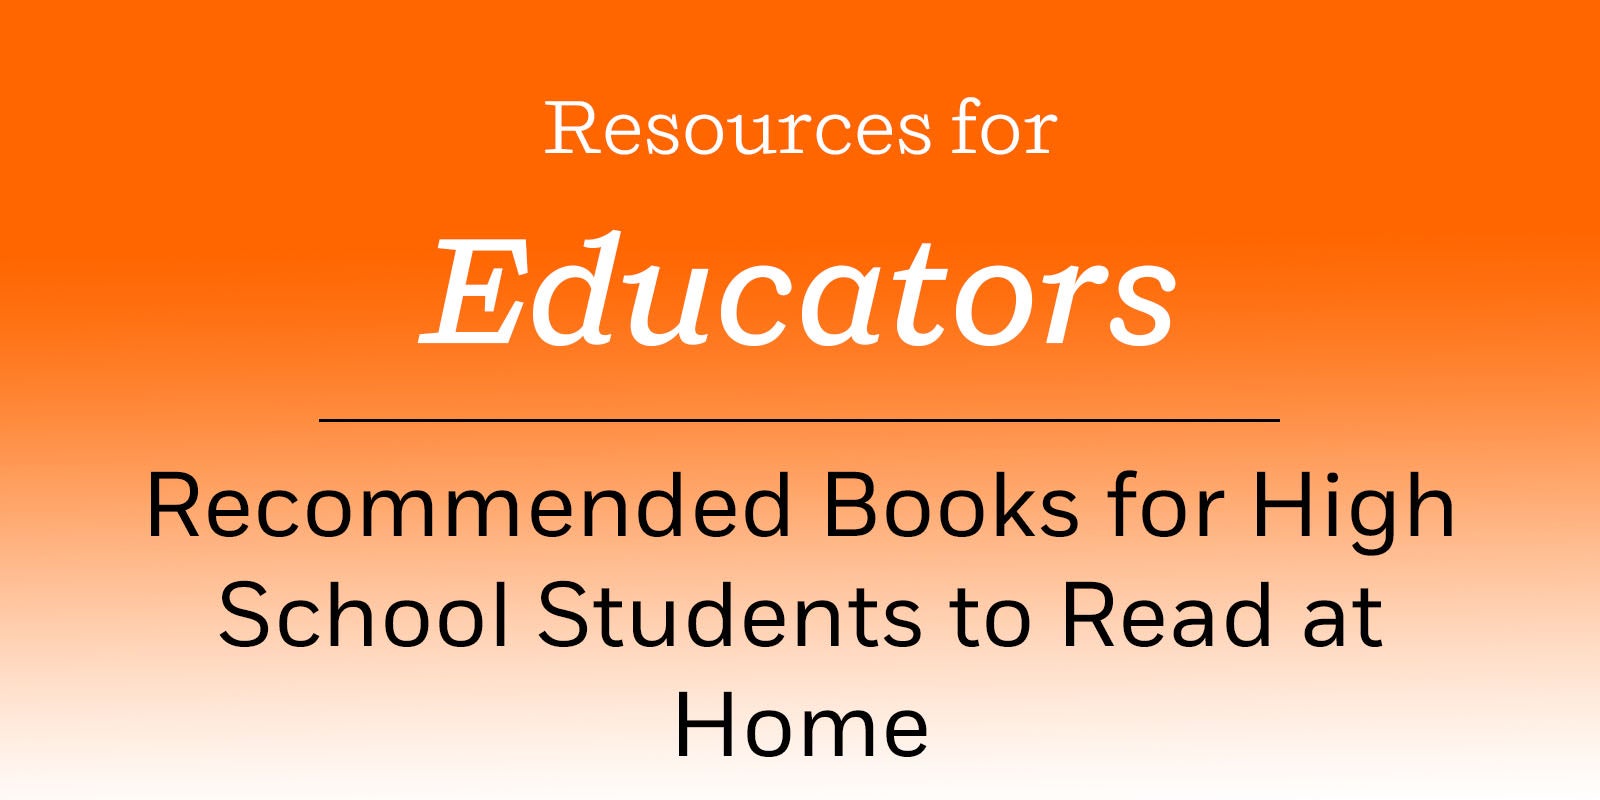 Recommended Books for High School Students to Read at Home